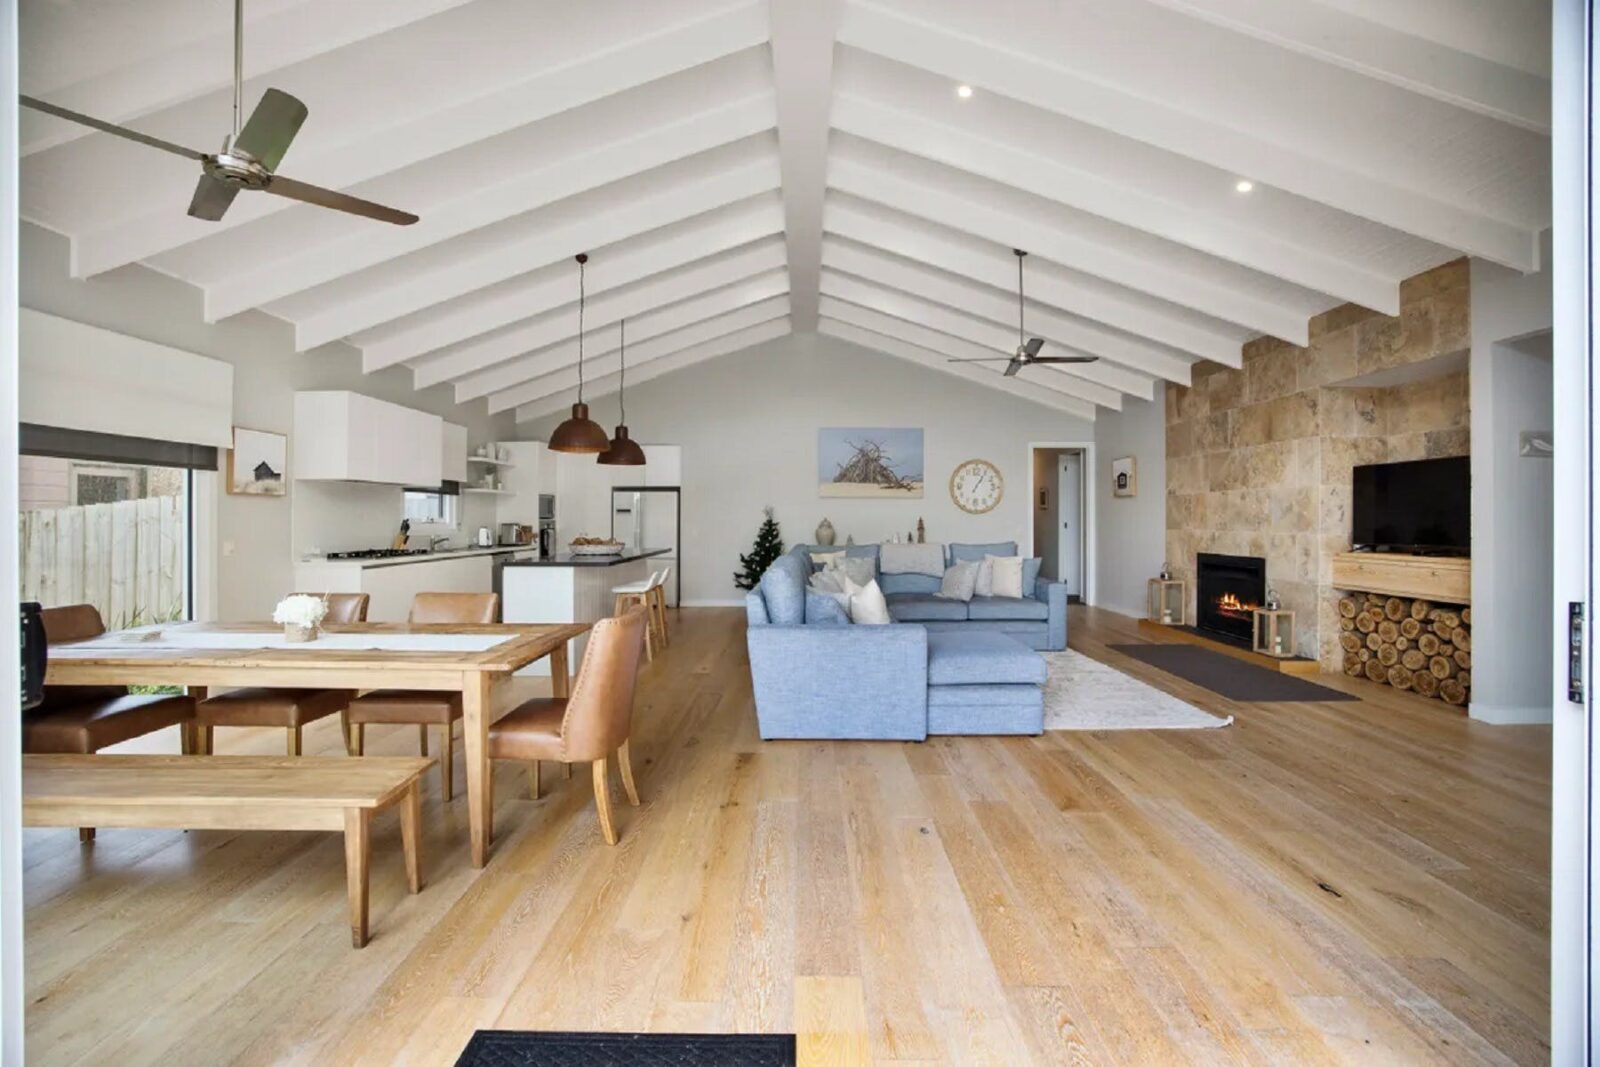 Large bright living space with exposed beams, modern kitchen, large comfortable couch & table, fans